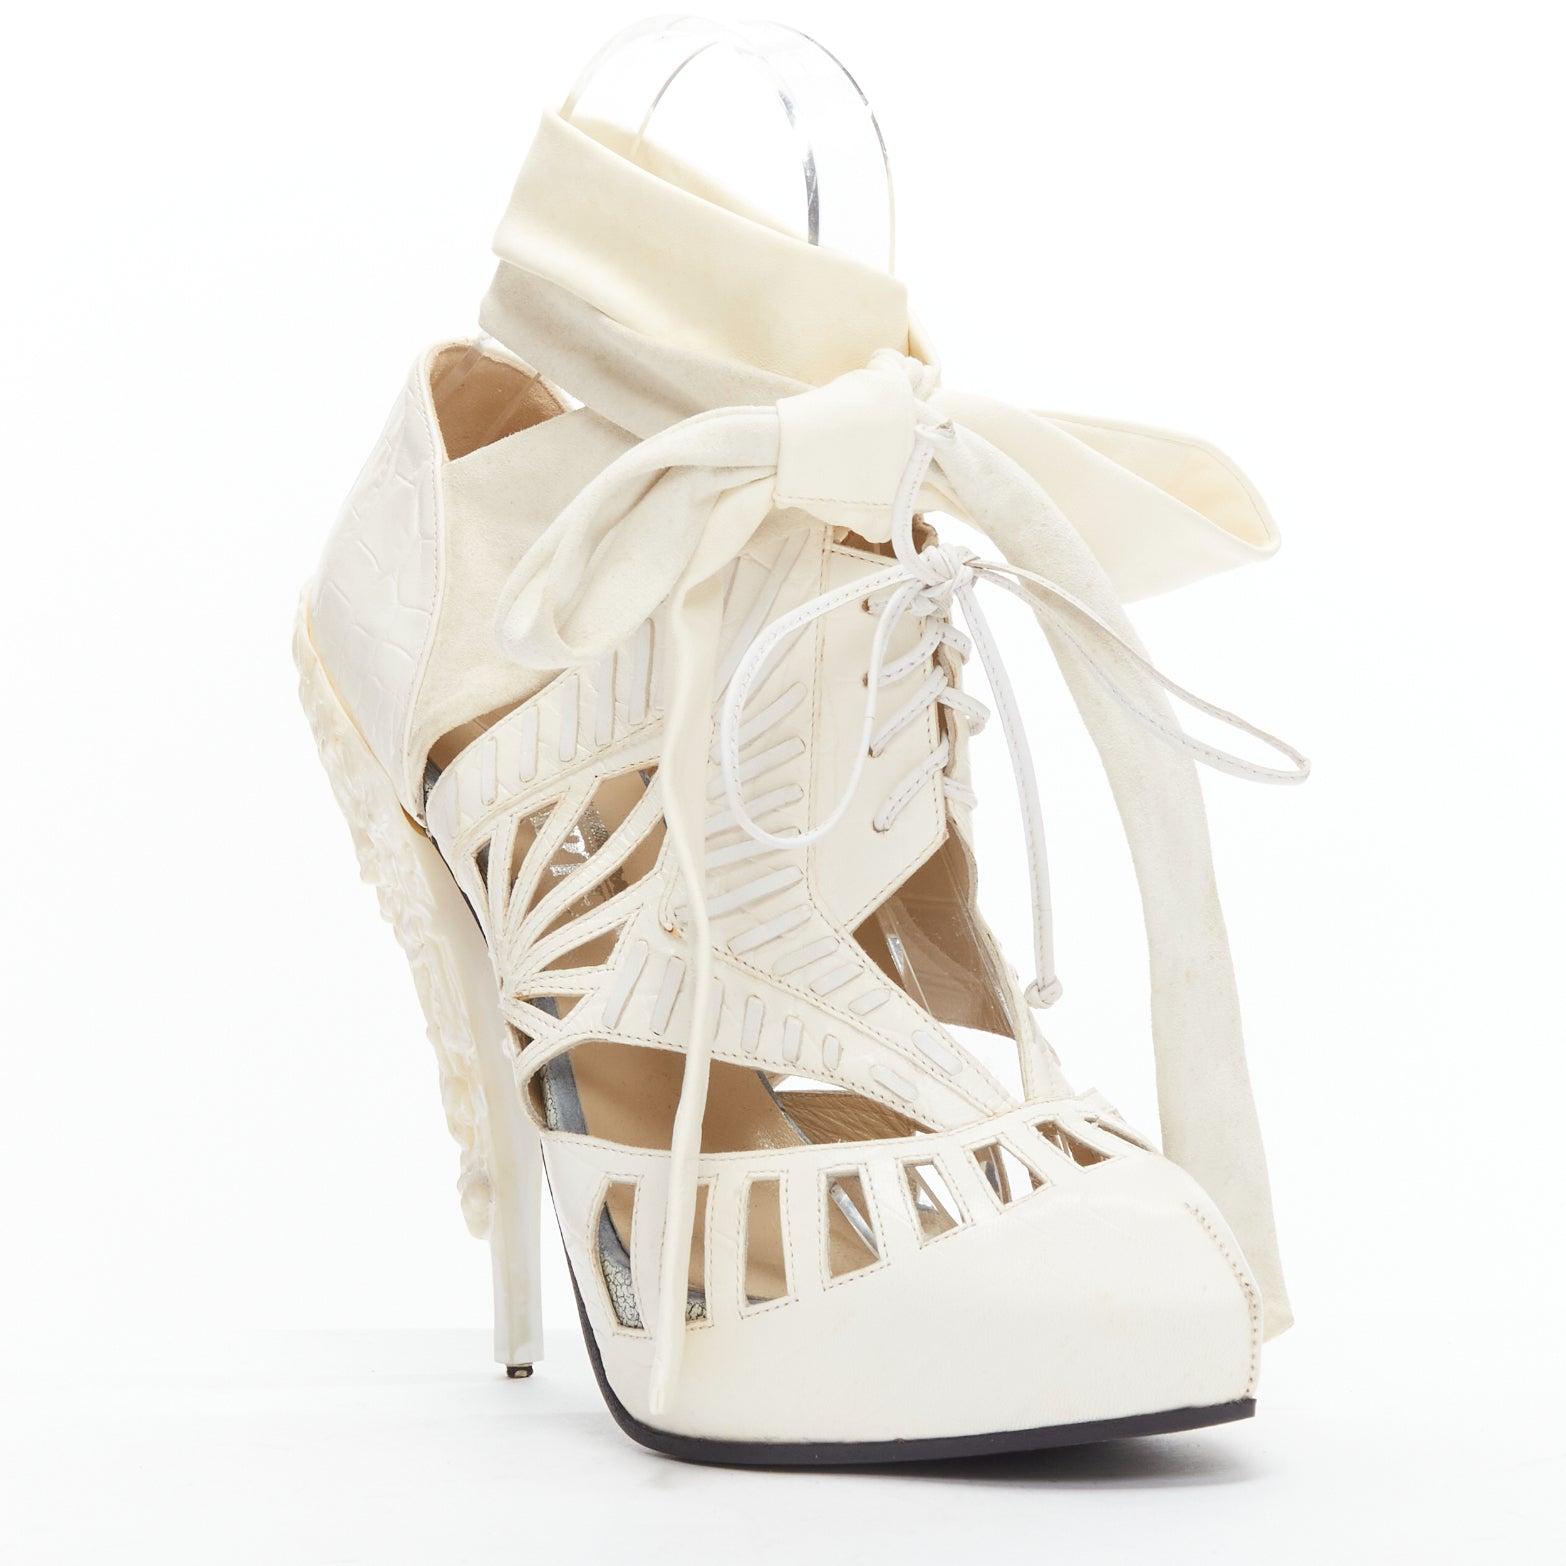 RODARTE Nicholas Kirkwood off white leather structural tie heels EU38
Reference: BSHW/A00173
Brand: Rodarte
Collection: Nicolas Kirkwood - Runway
Material: Leather
Color: Cream
Pattern: Solid
Closure: Ankle Tie
Lining: Nude Leather
Extra Details: